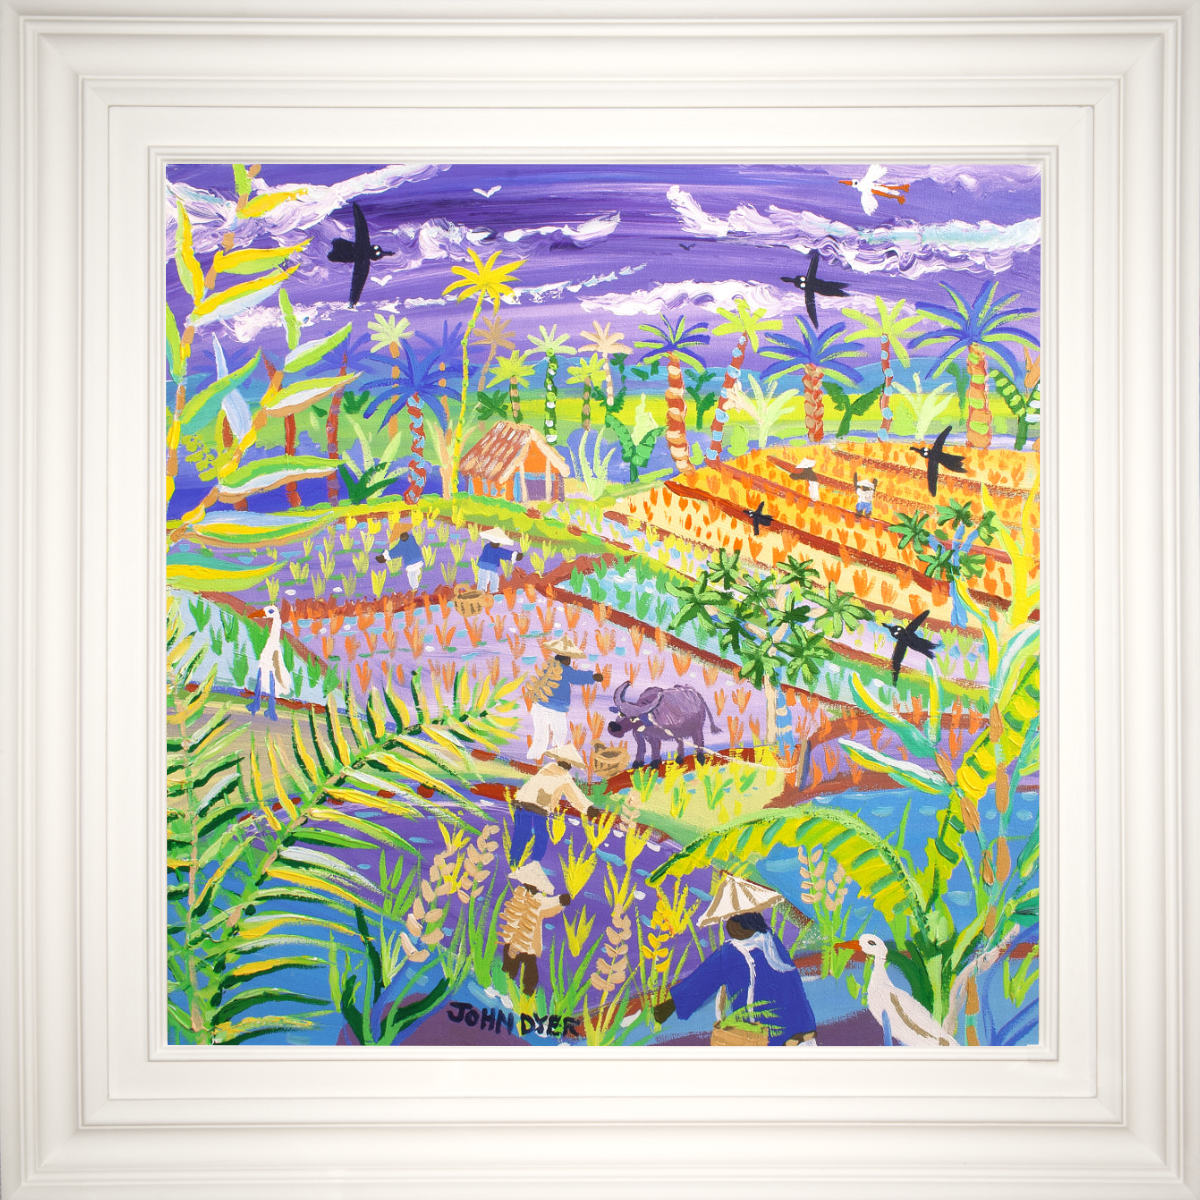 &#39;Water Buffalo and Rice Terraces, the Philippines&#39;. 24x24 inches acrylic on canvas. Paintings of Philippines by John Dyer from our Online Art Gallery